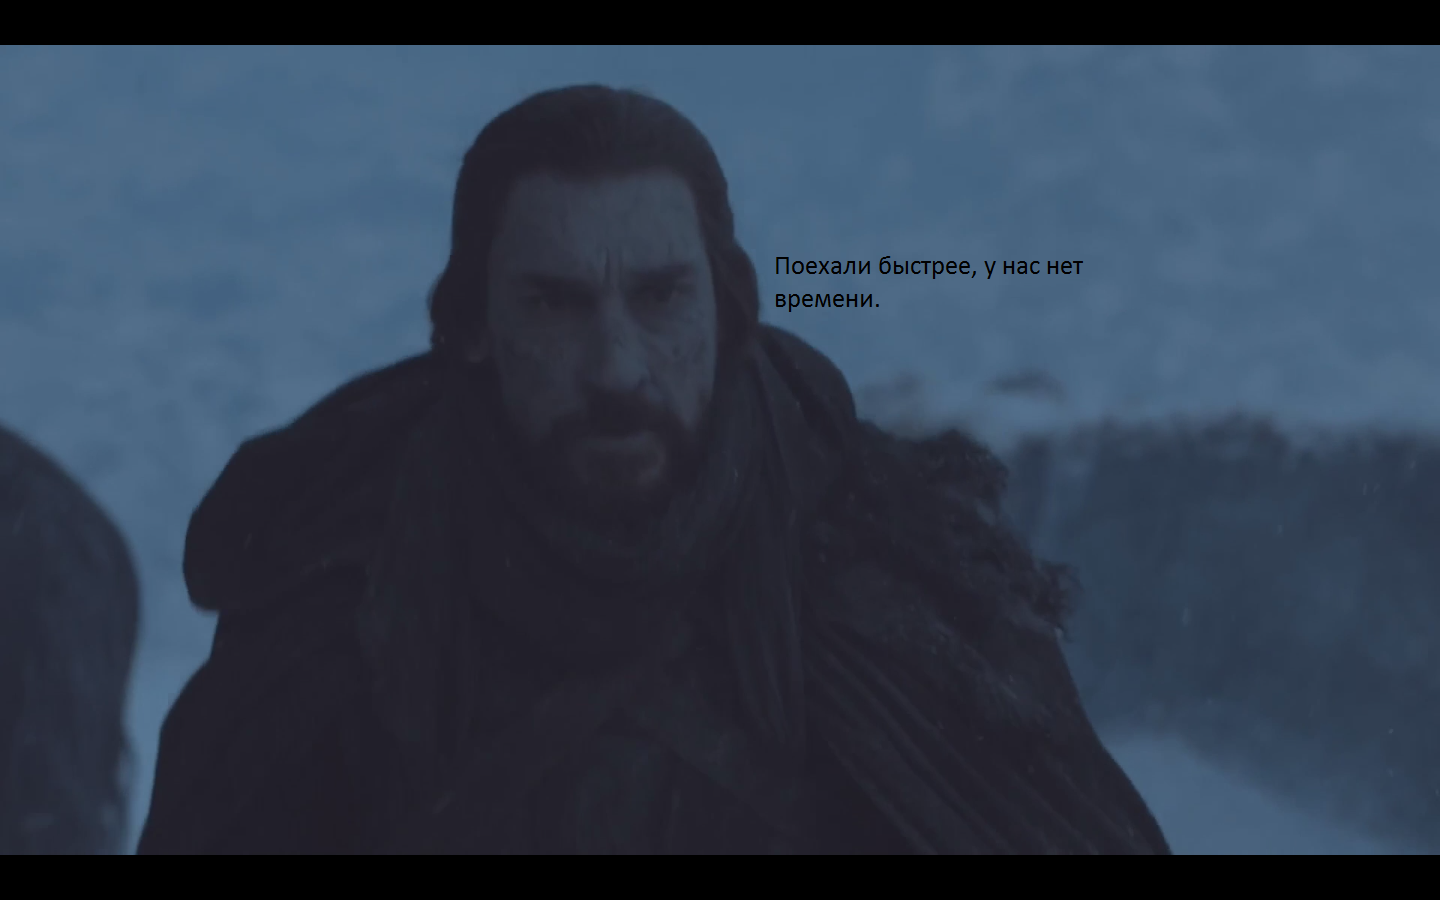 How it really was. - My, Game of Thrones, Spoiler, Jon Snow, Humor, Picture with text, Storyboard